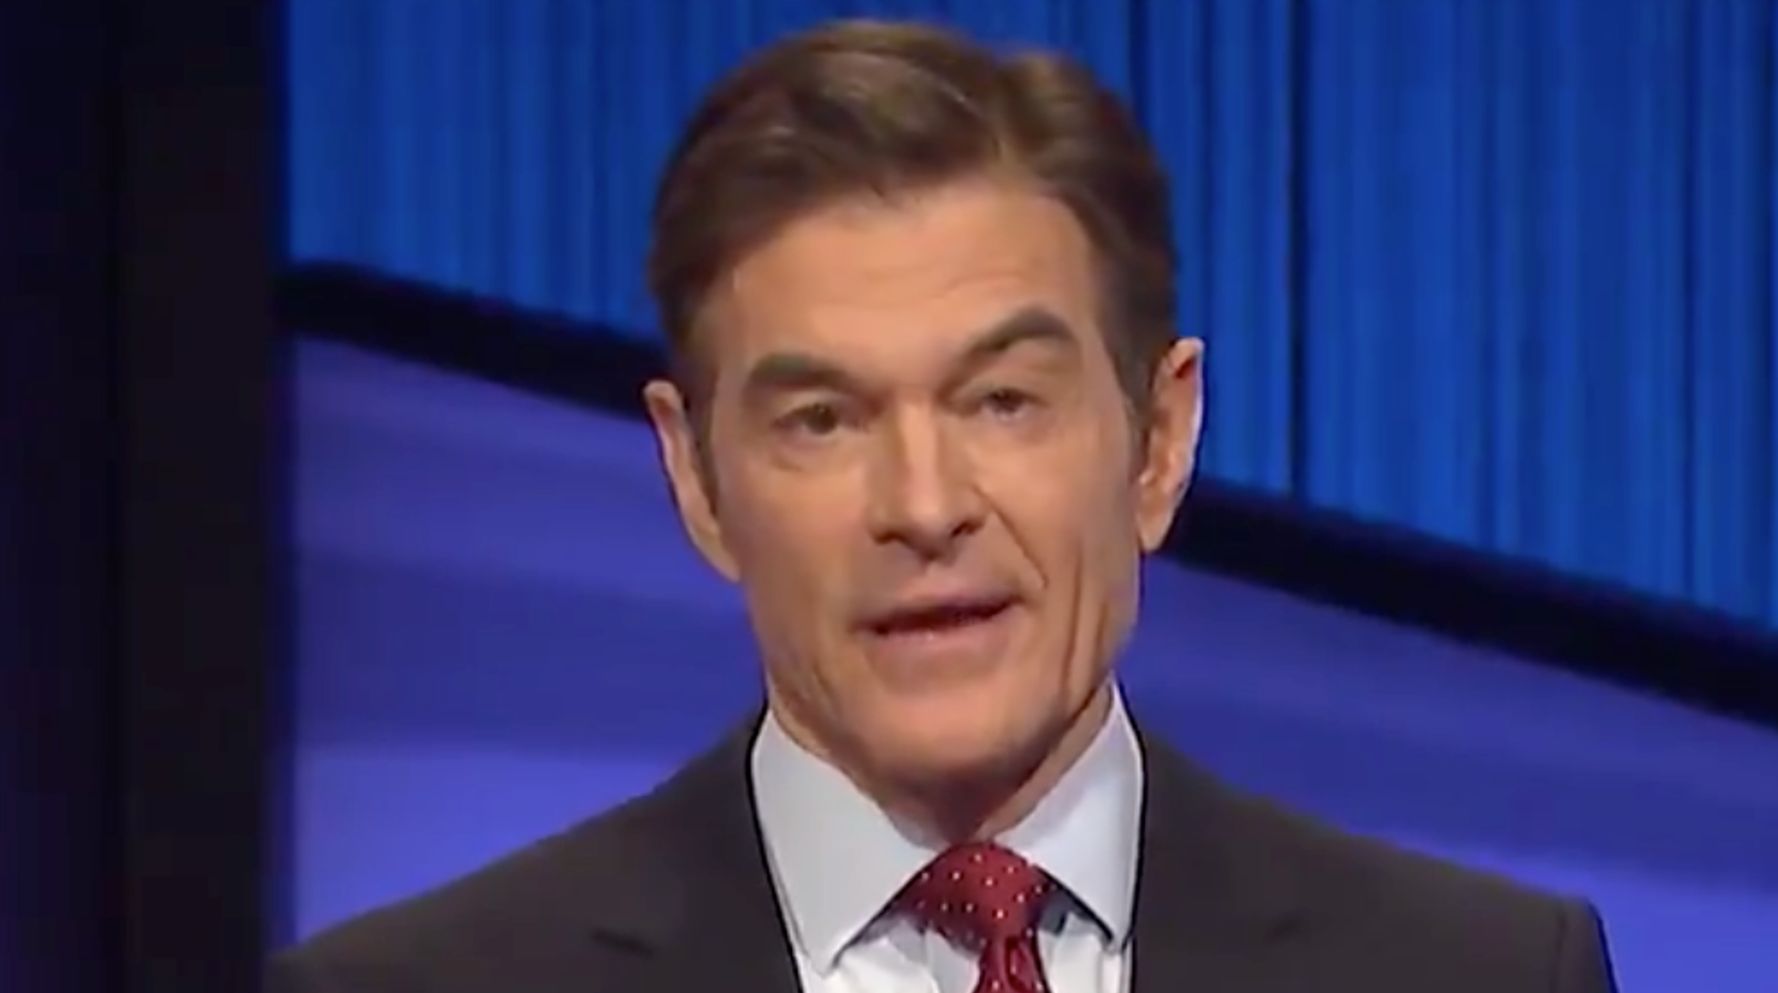 Dr.  Oz is ‘Jeopardy!’  Stint shreds on social media: he is ‘dangerous’